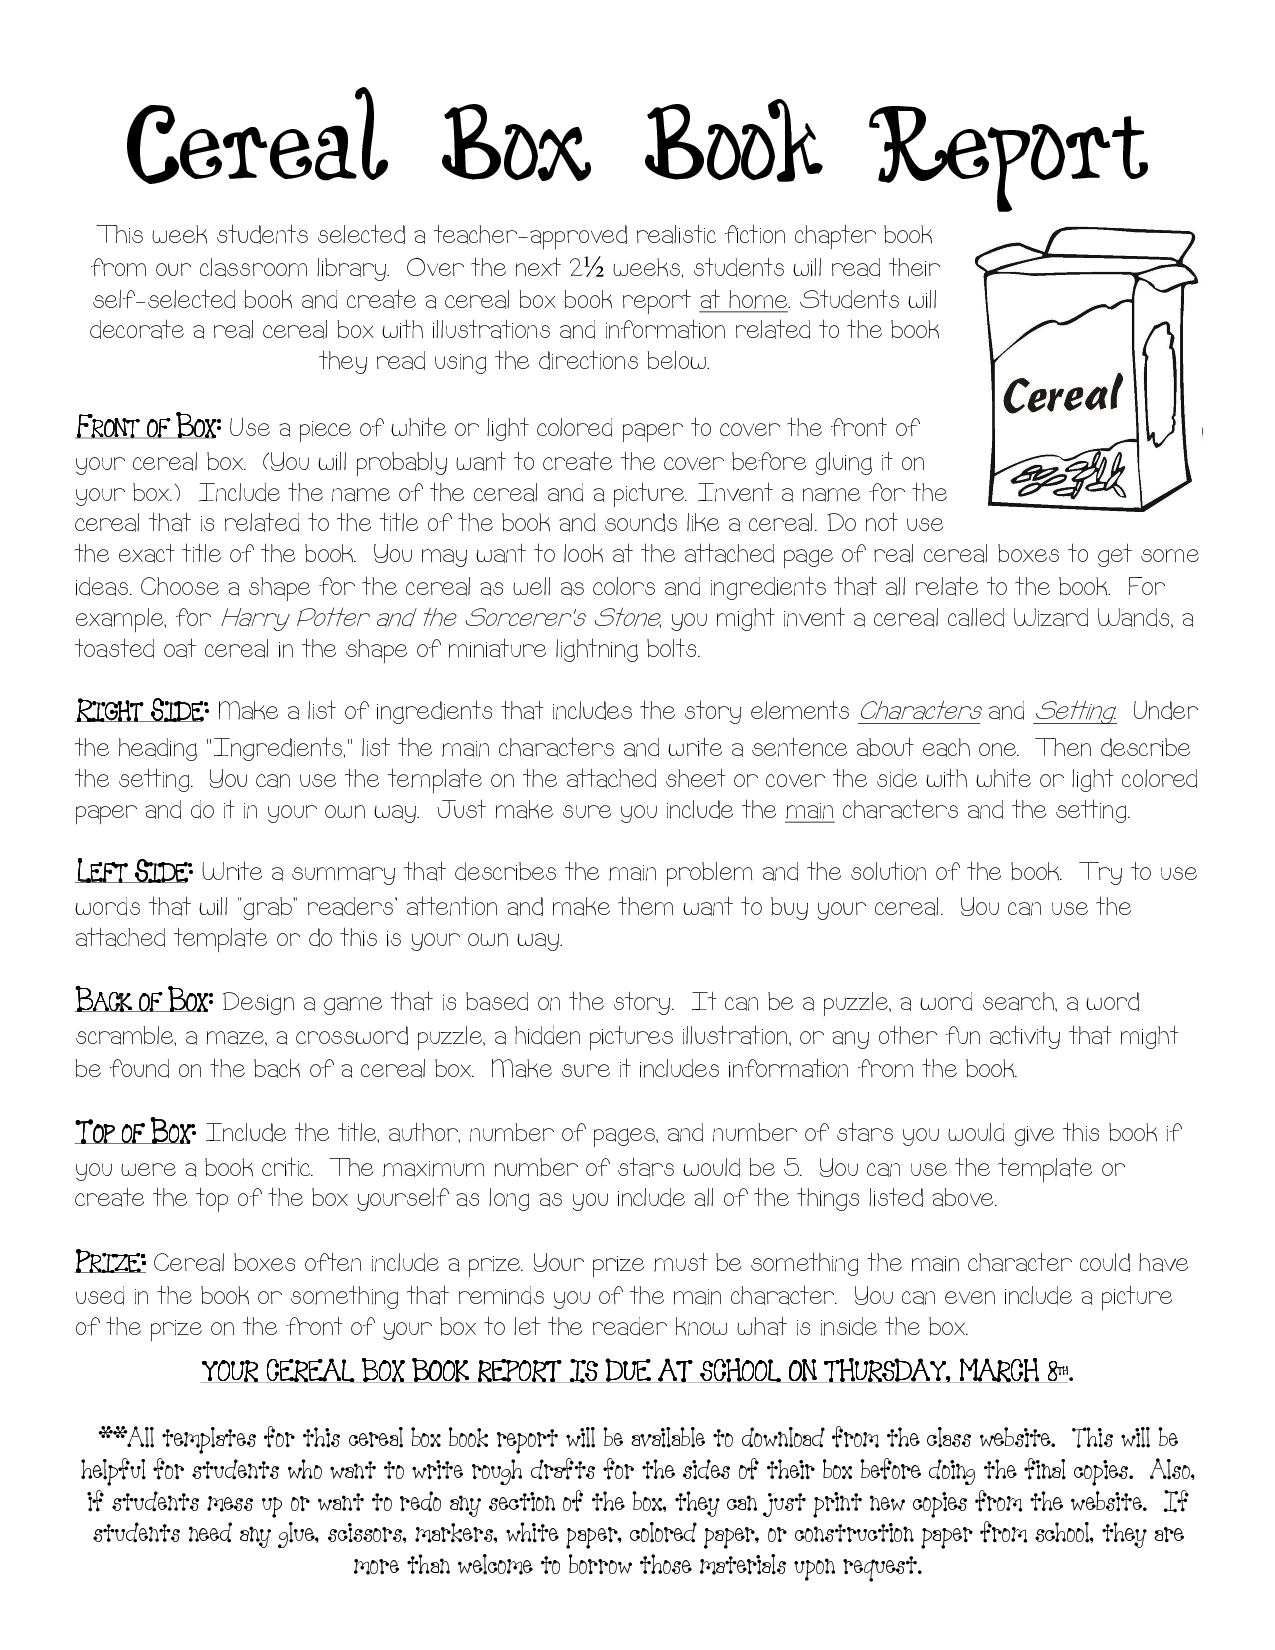 Cereal Box Book Report Instructions | Cereal Box Book Report Within Cereal Box Book Report Template